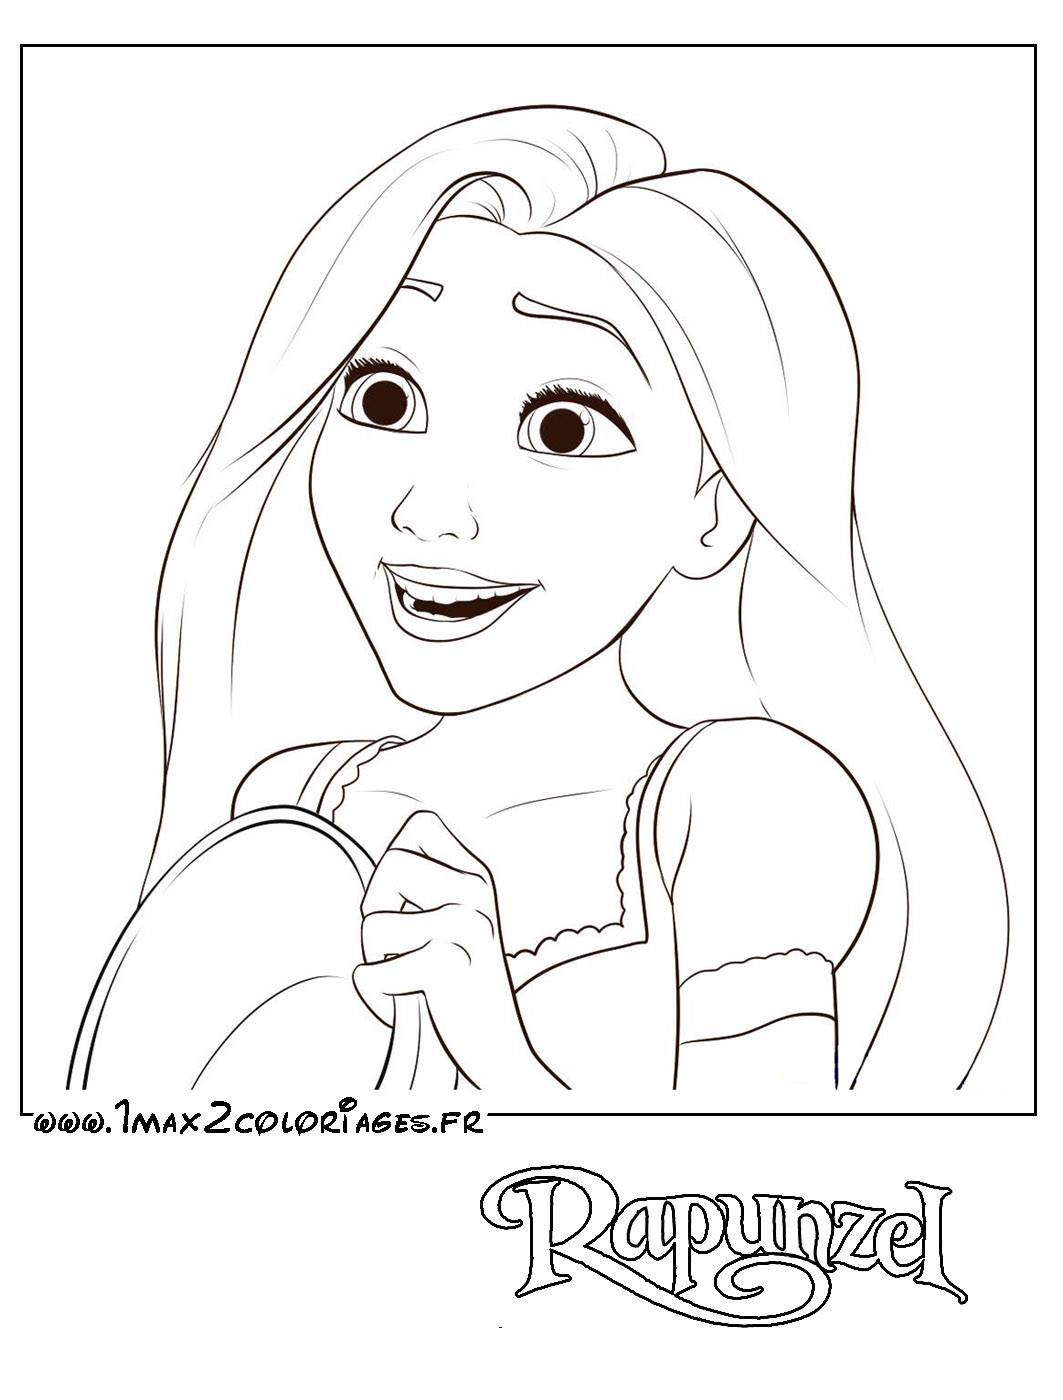 Free Tangled coloring page to print and color, for kids : Rapunzel portrait